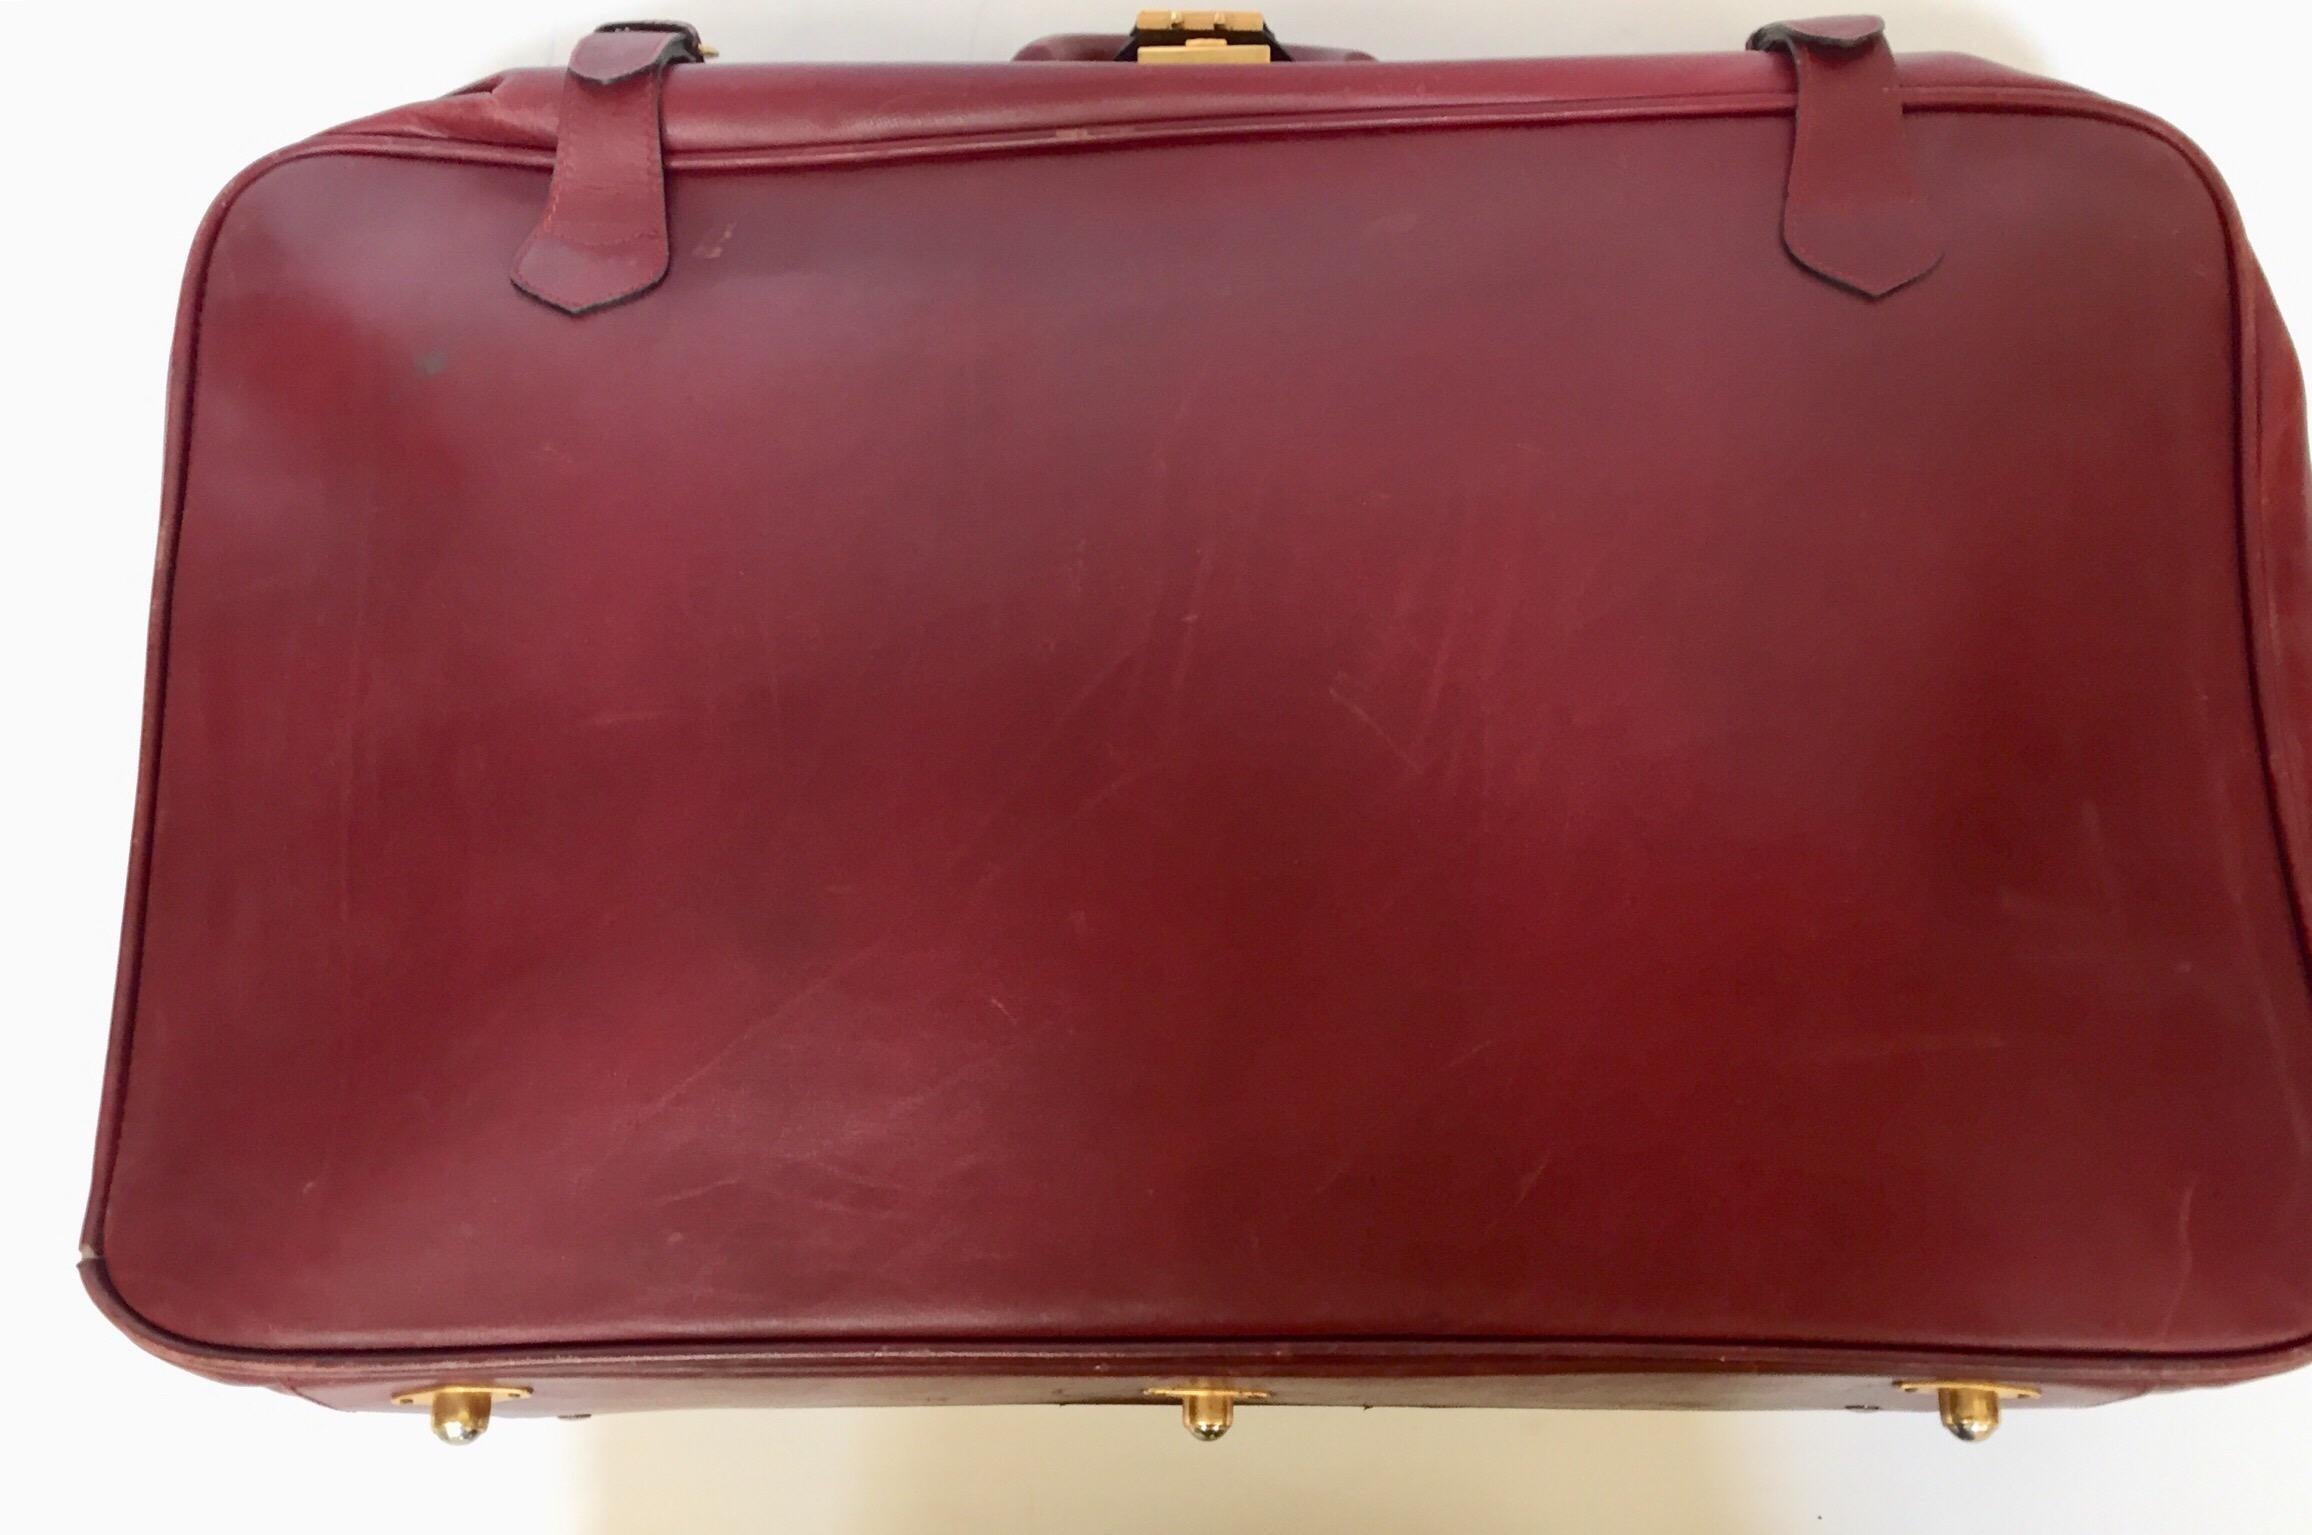 Les Must de Cartier Vintage Leather Suitcase Burgundy Bordeaux Luggage In Good Condition For Sale In North Hollywood, CA